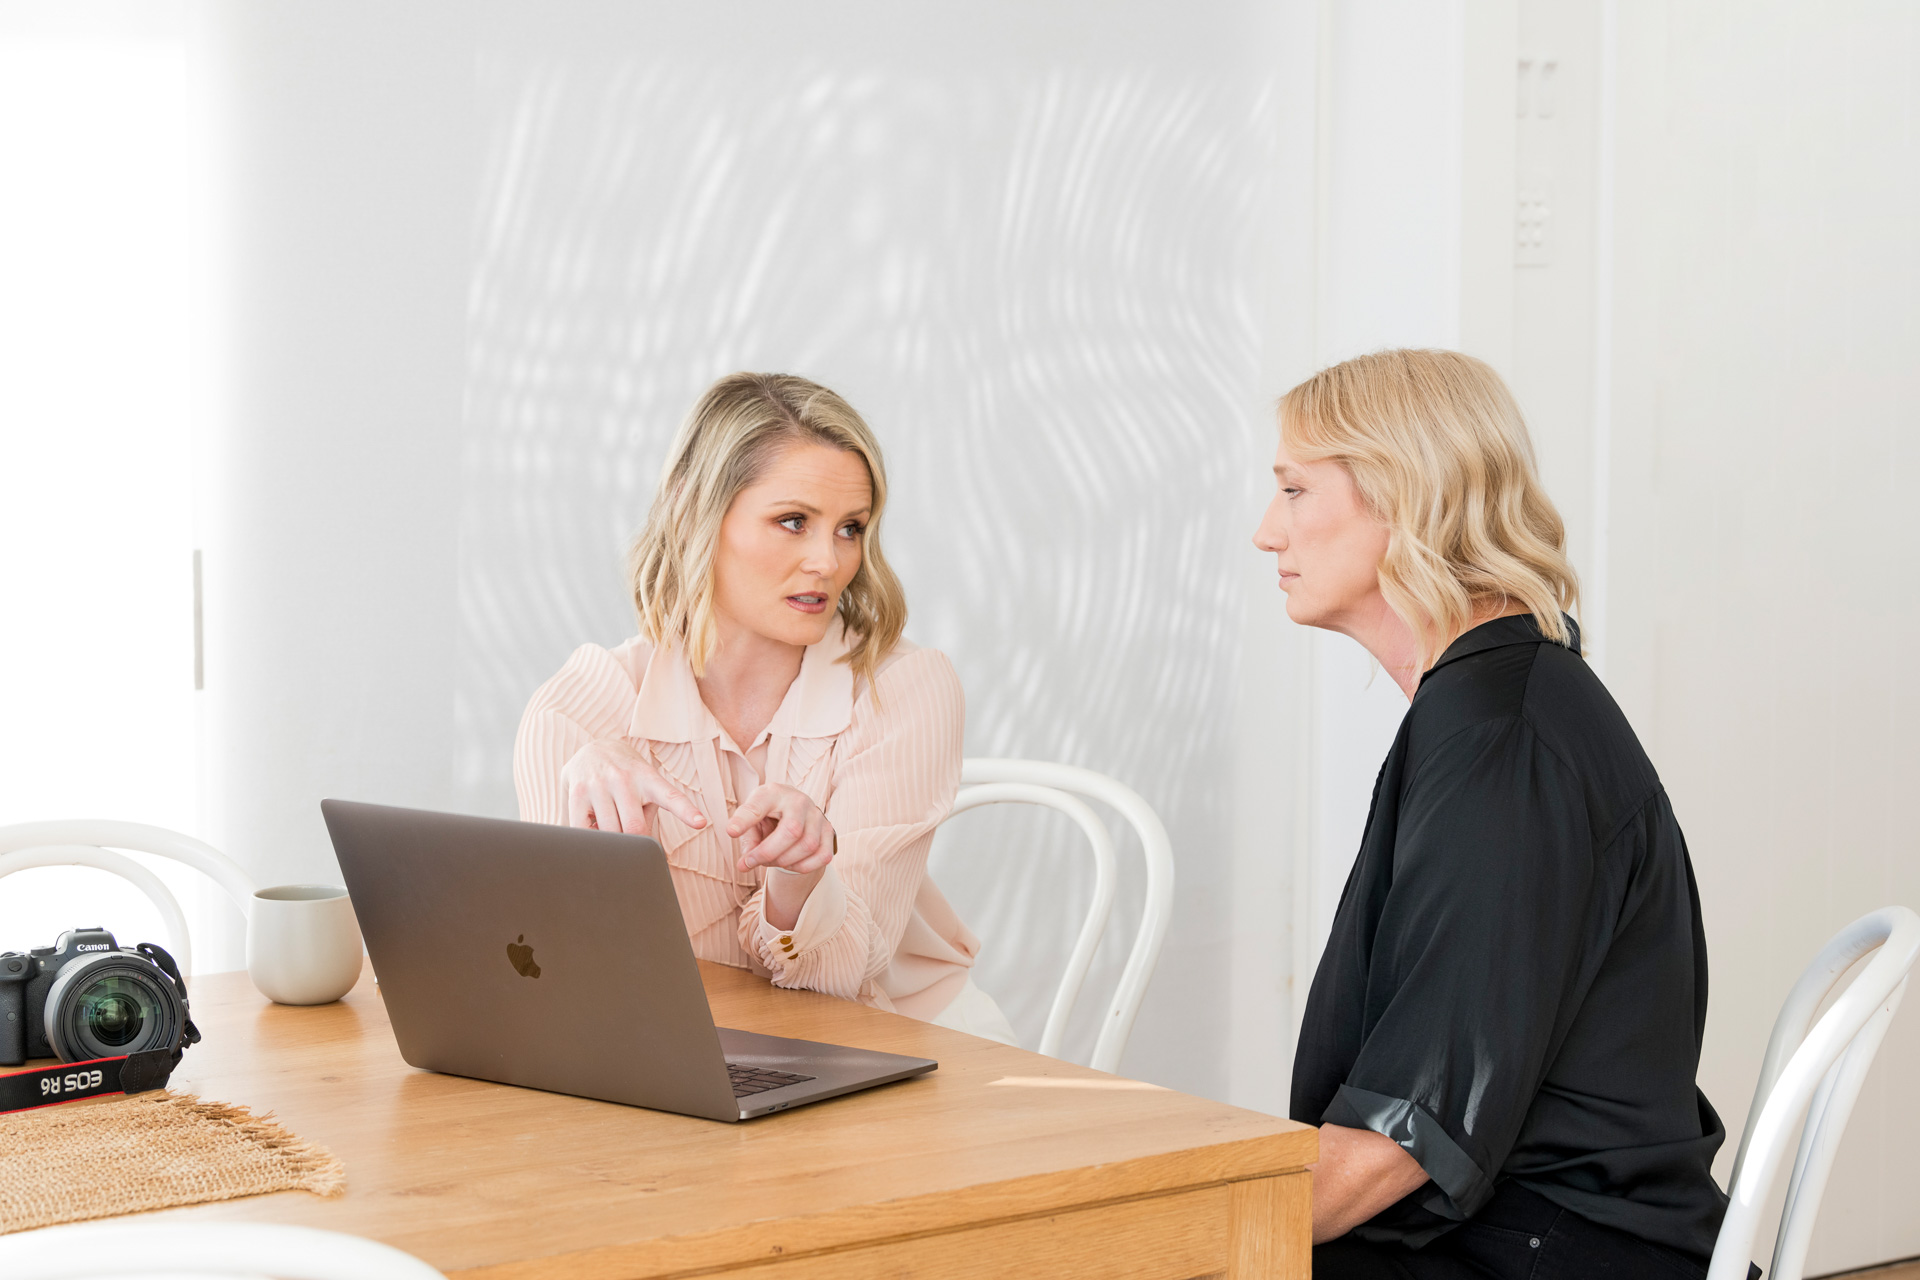 Two business women sitting at a table talking with a laptop in front of them